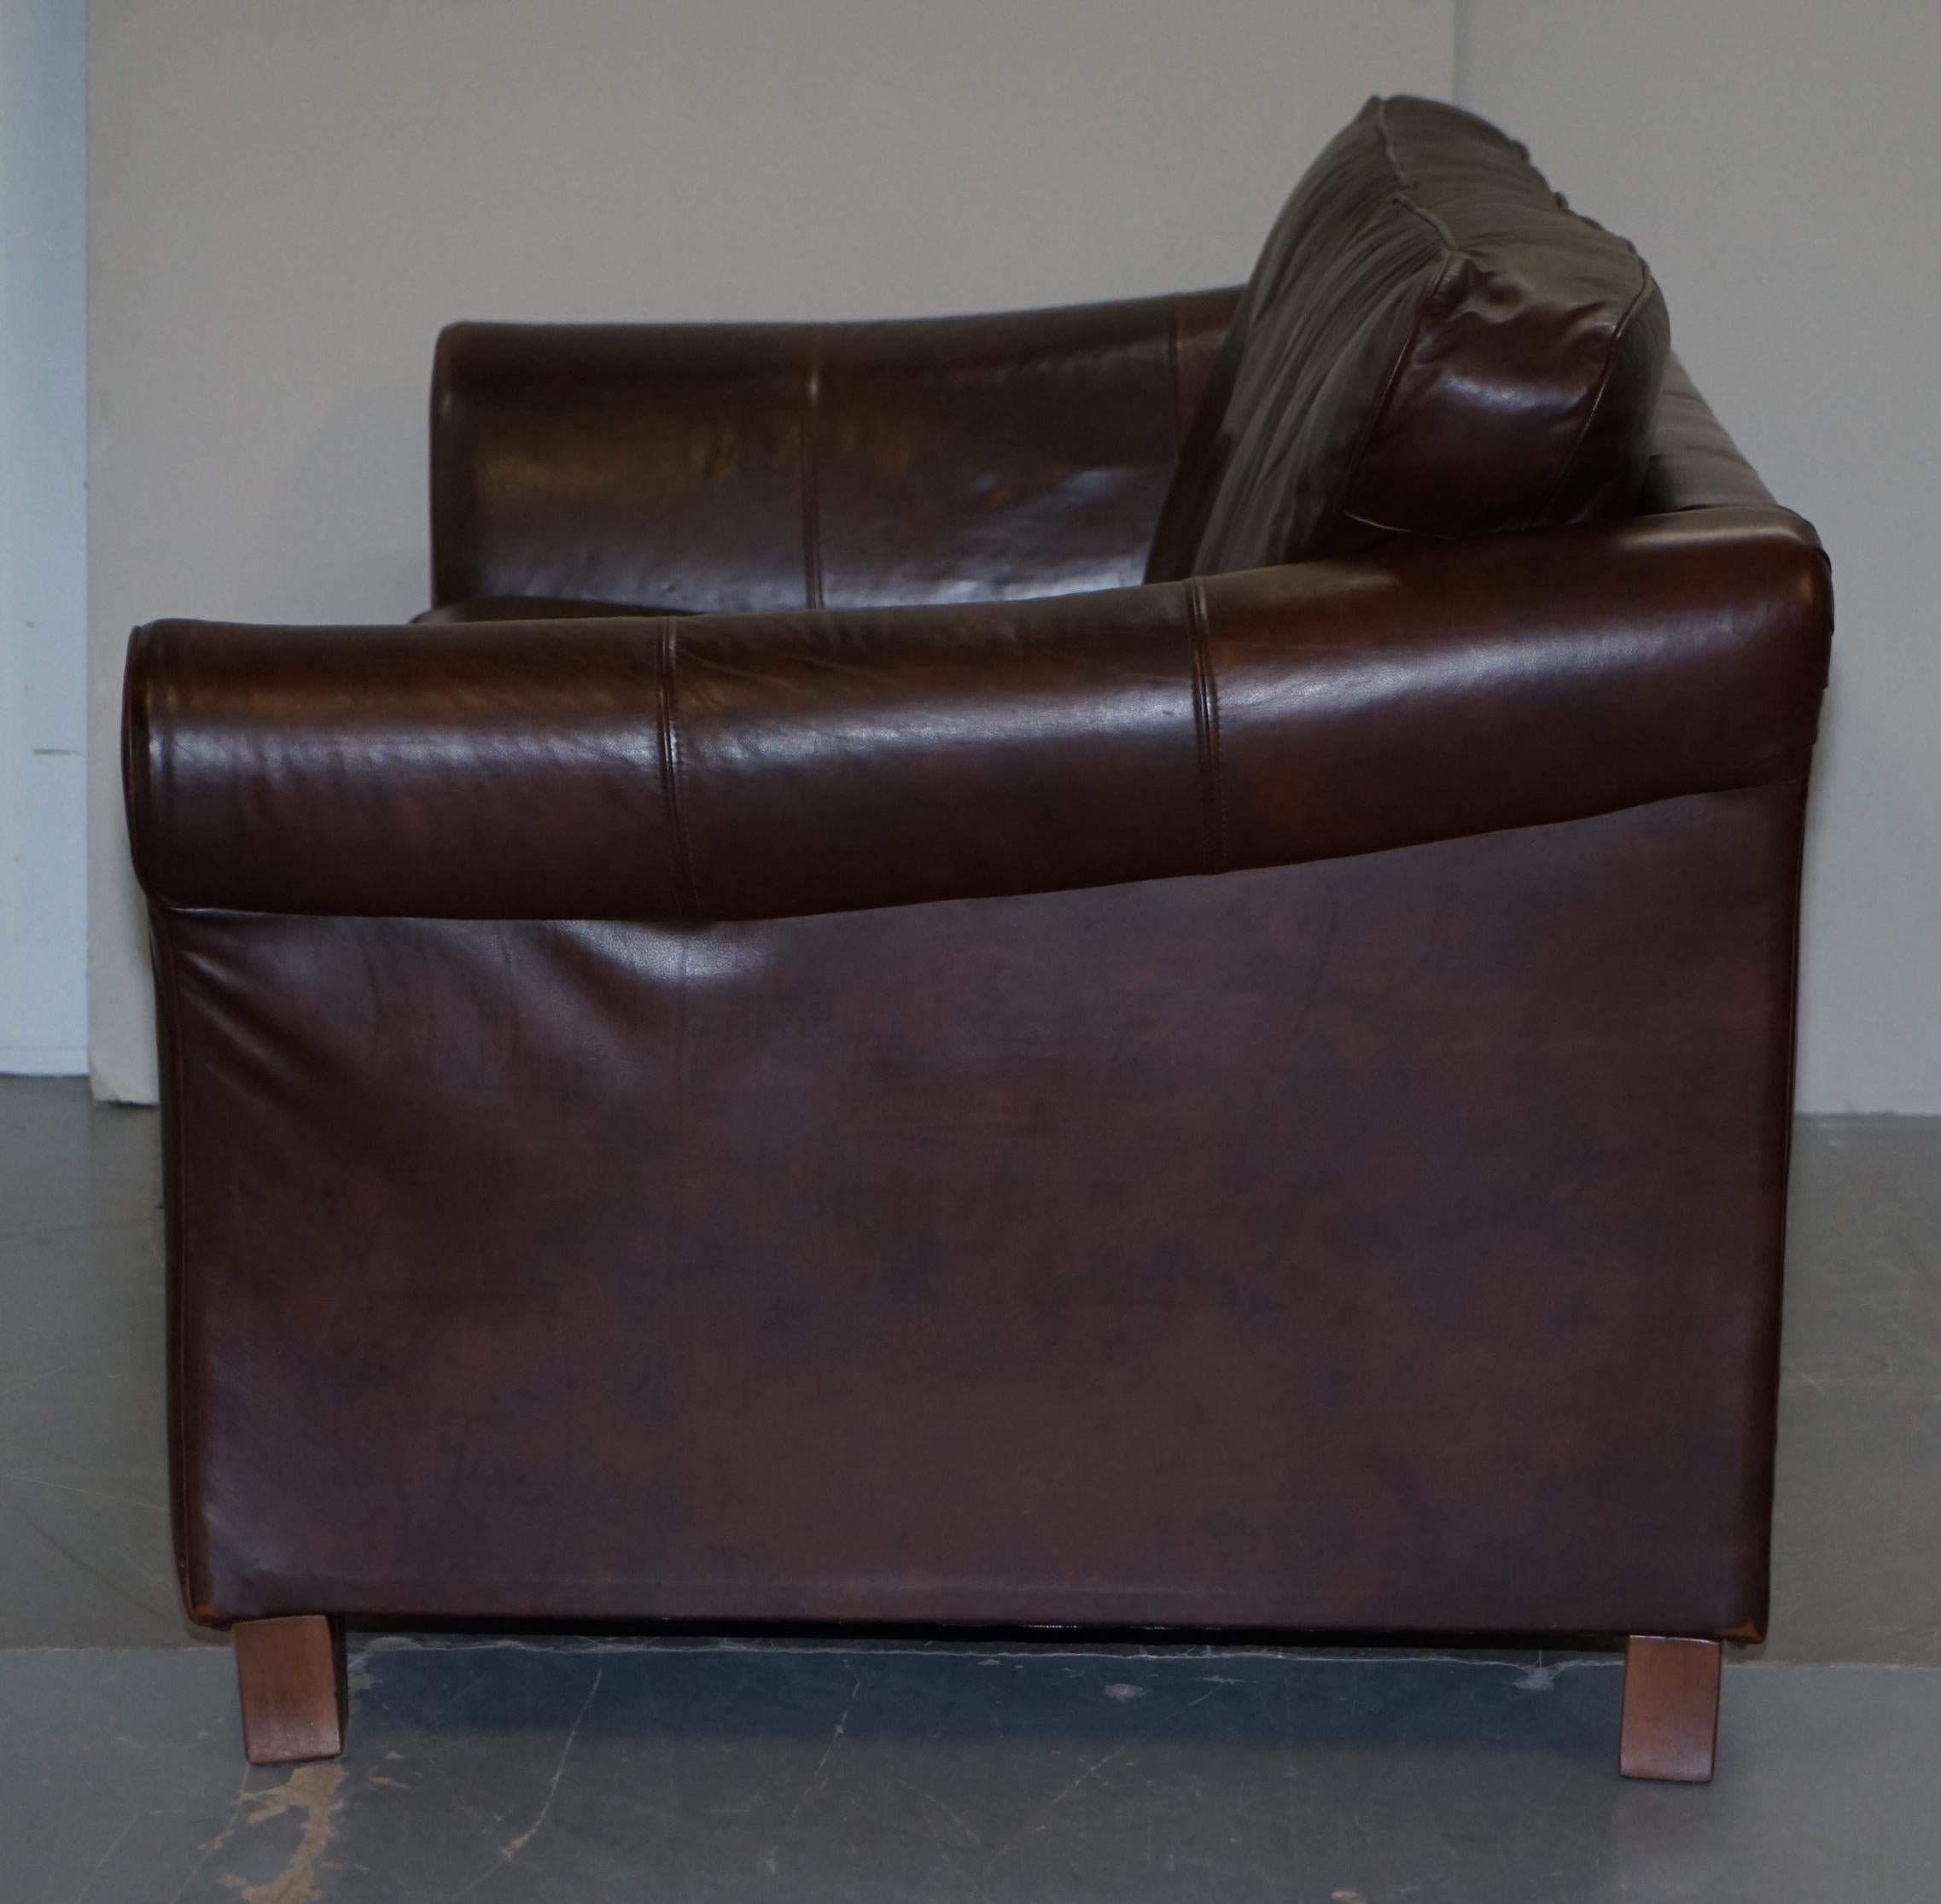 Marks & Spnecers Abbey Brown Leather Sofa Part of Suite with Armchairs For Sale 6